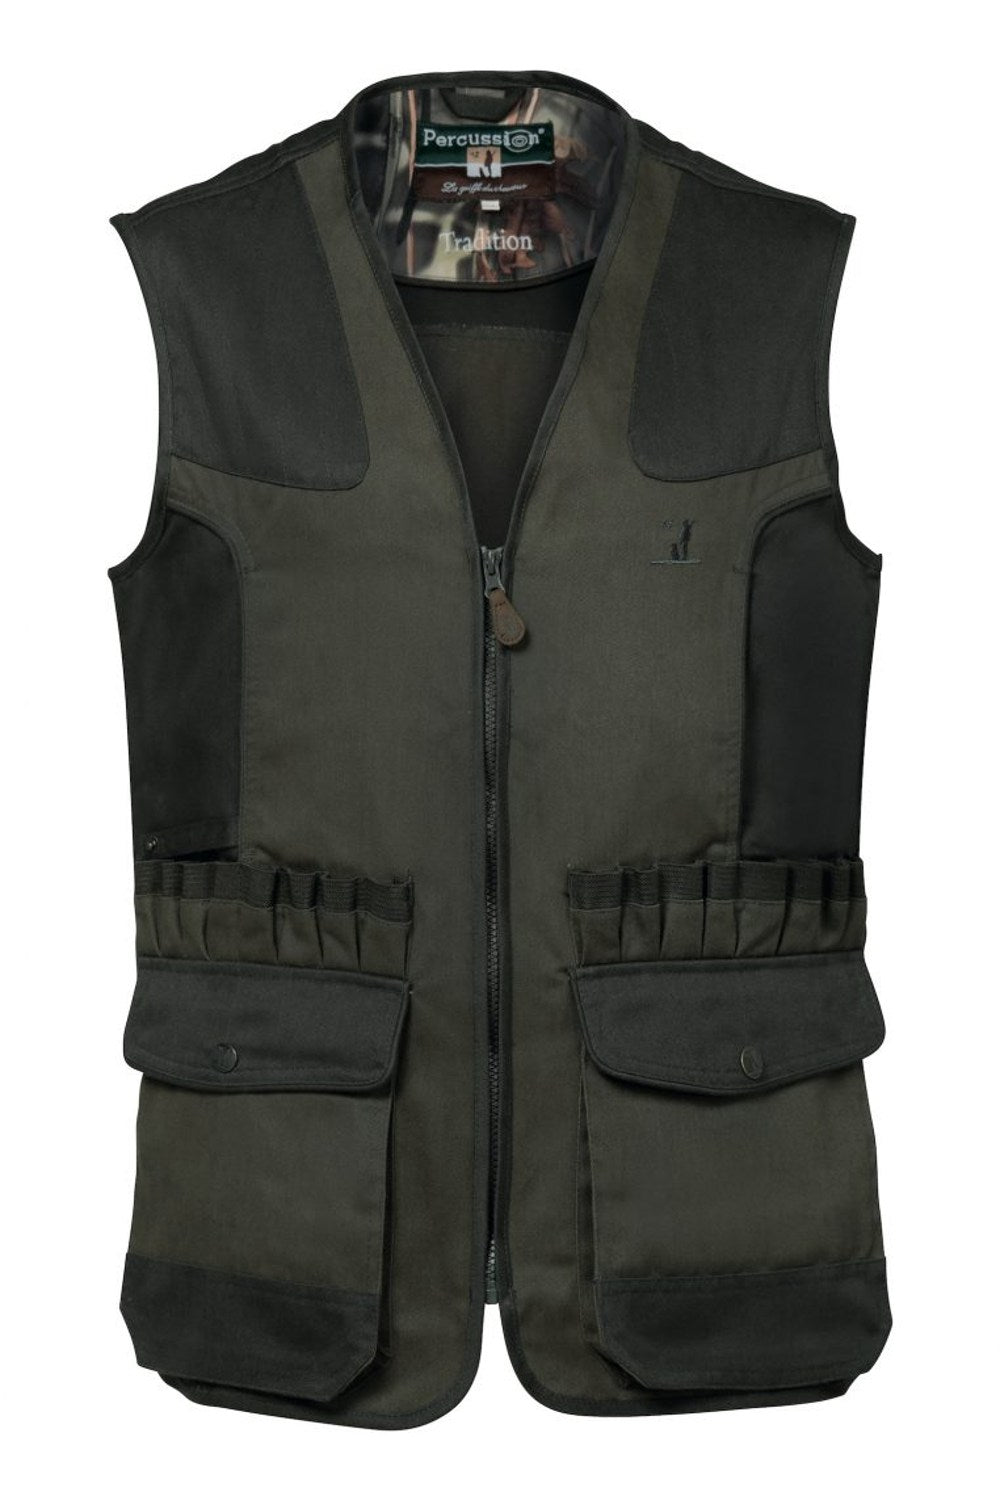 Percussion Tradition Hunting Gilet Vest in Khaki. 1215